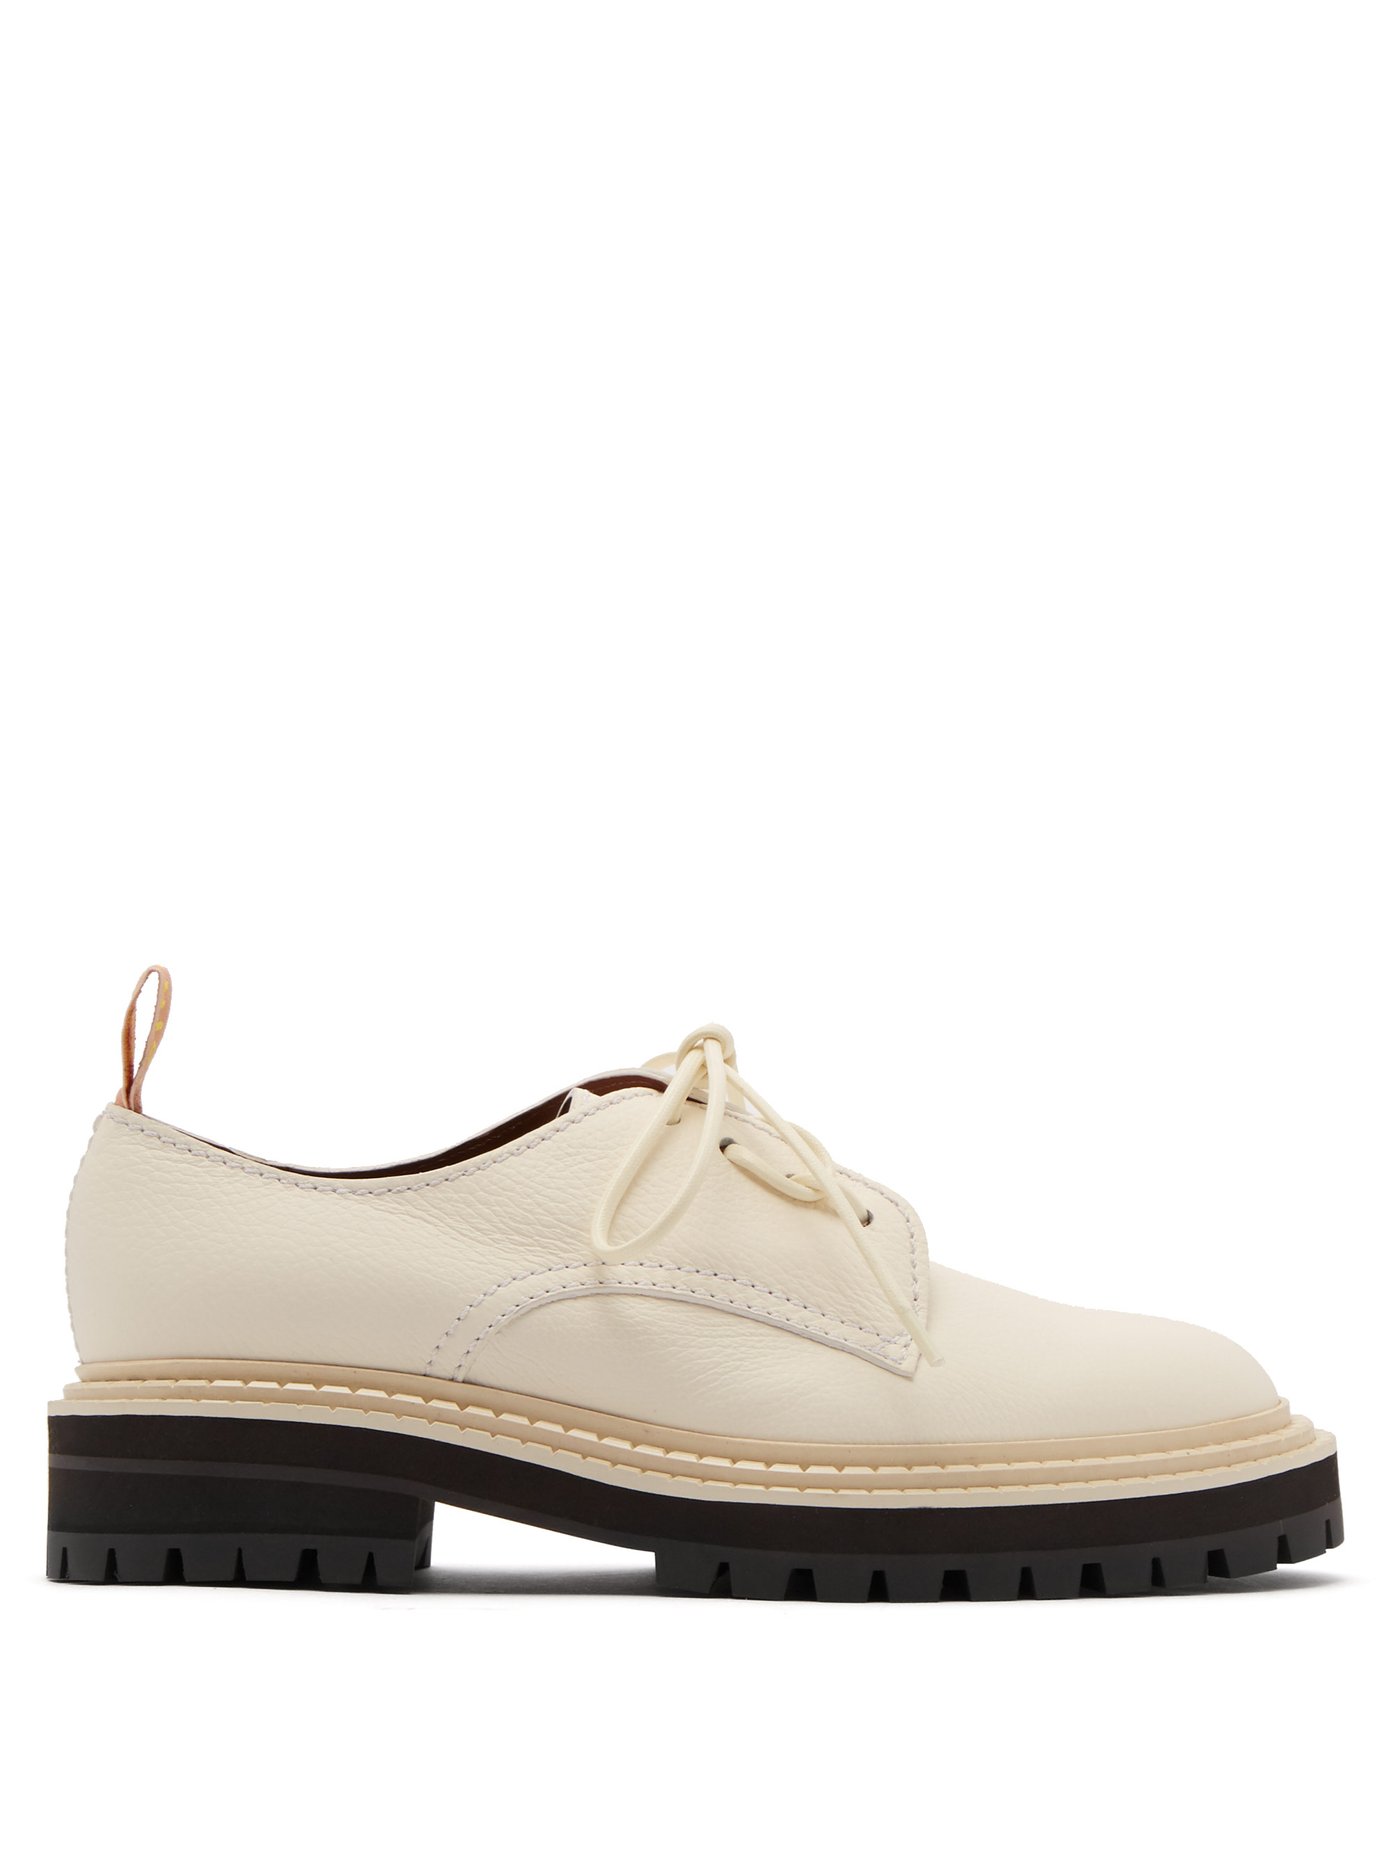 white lace up leather shoes